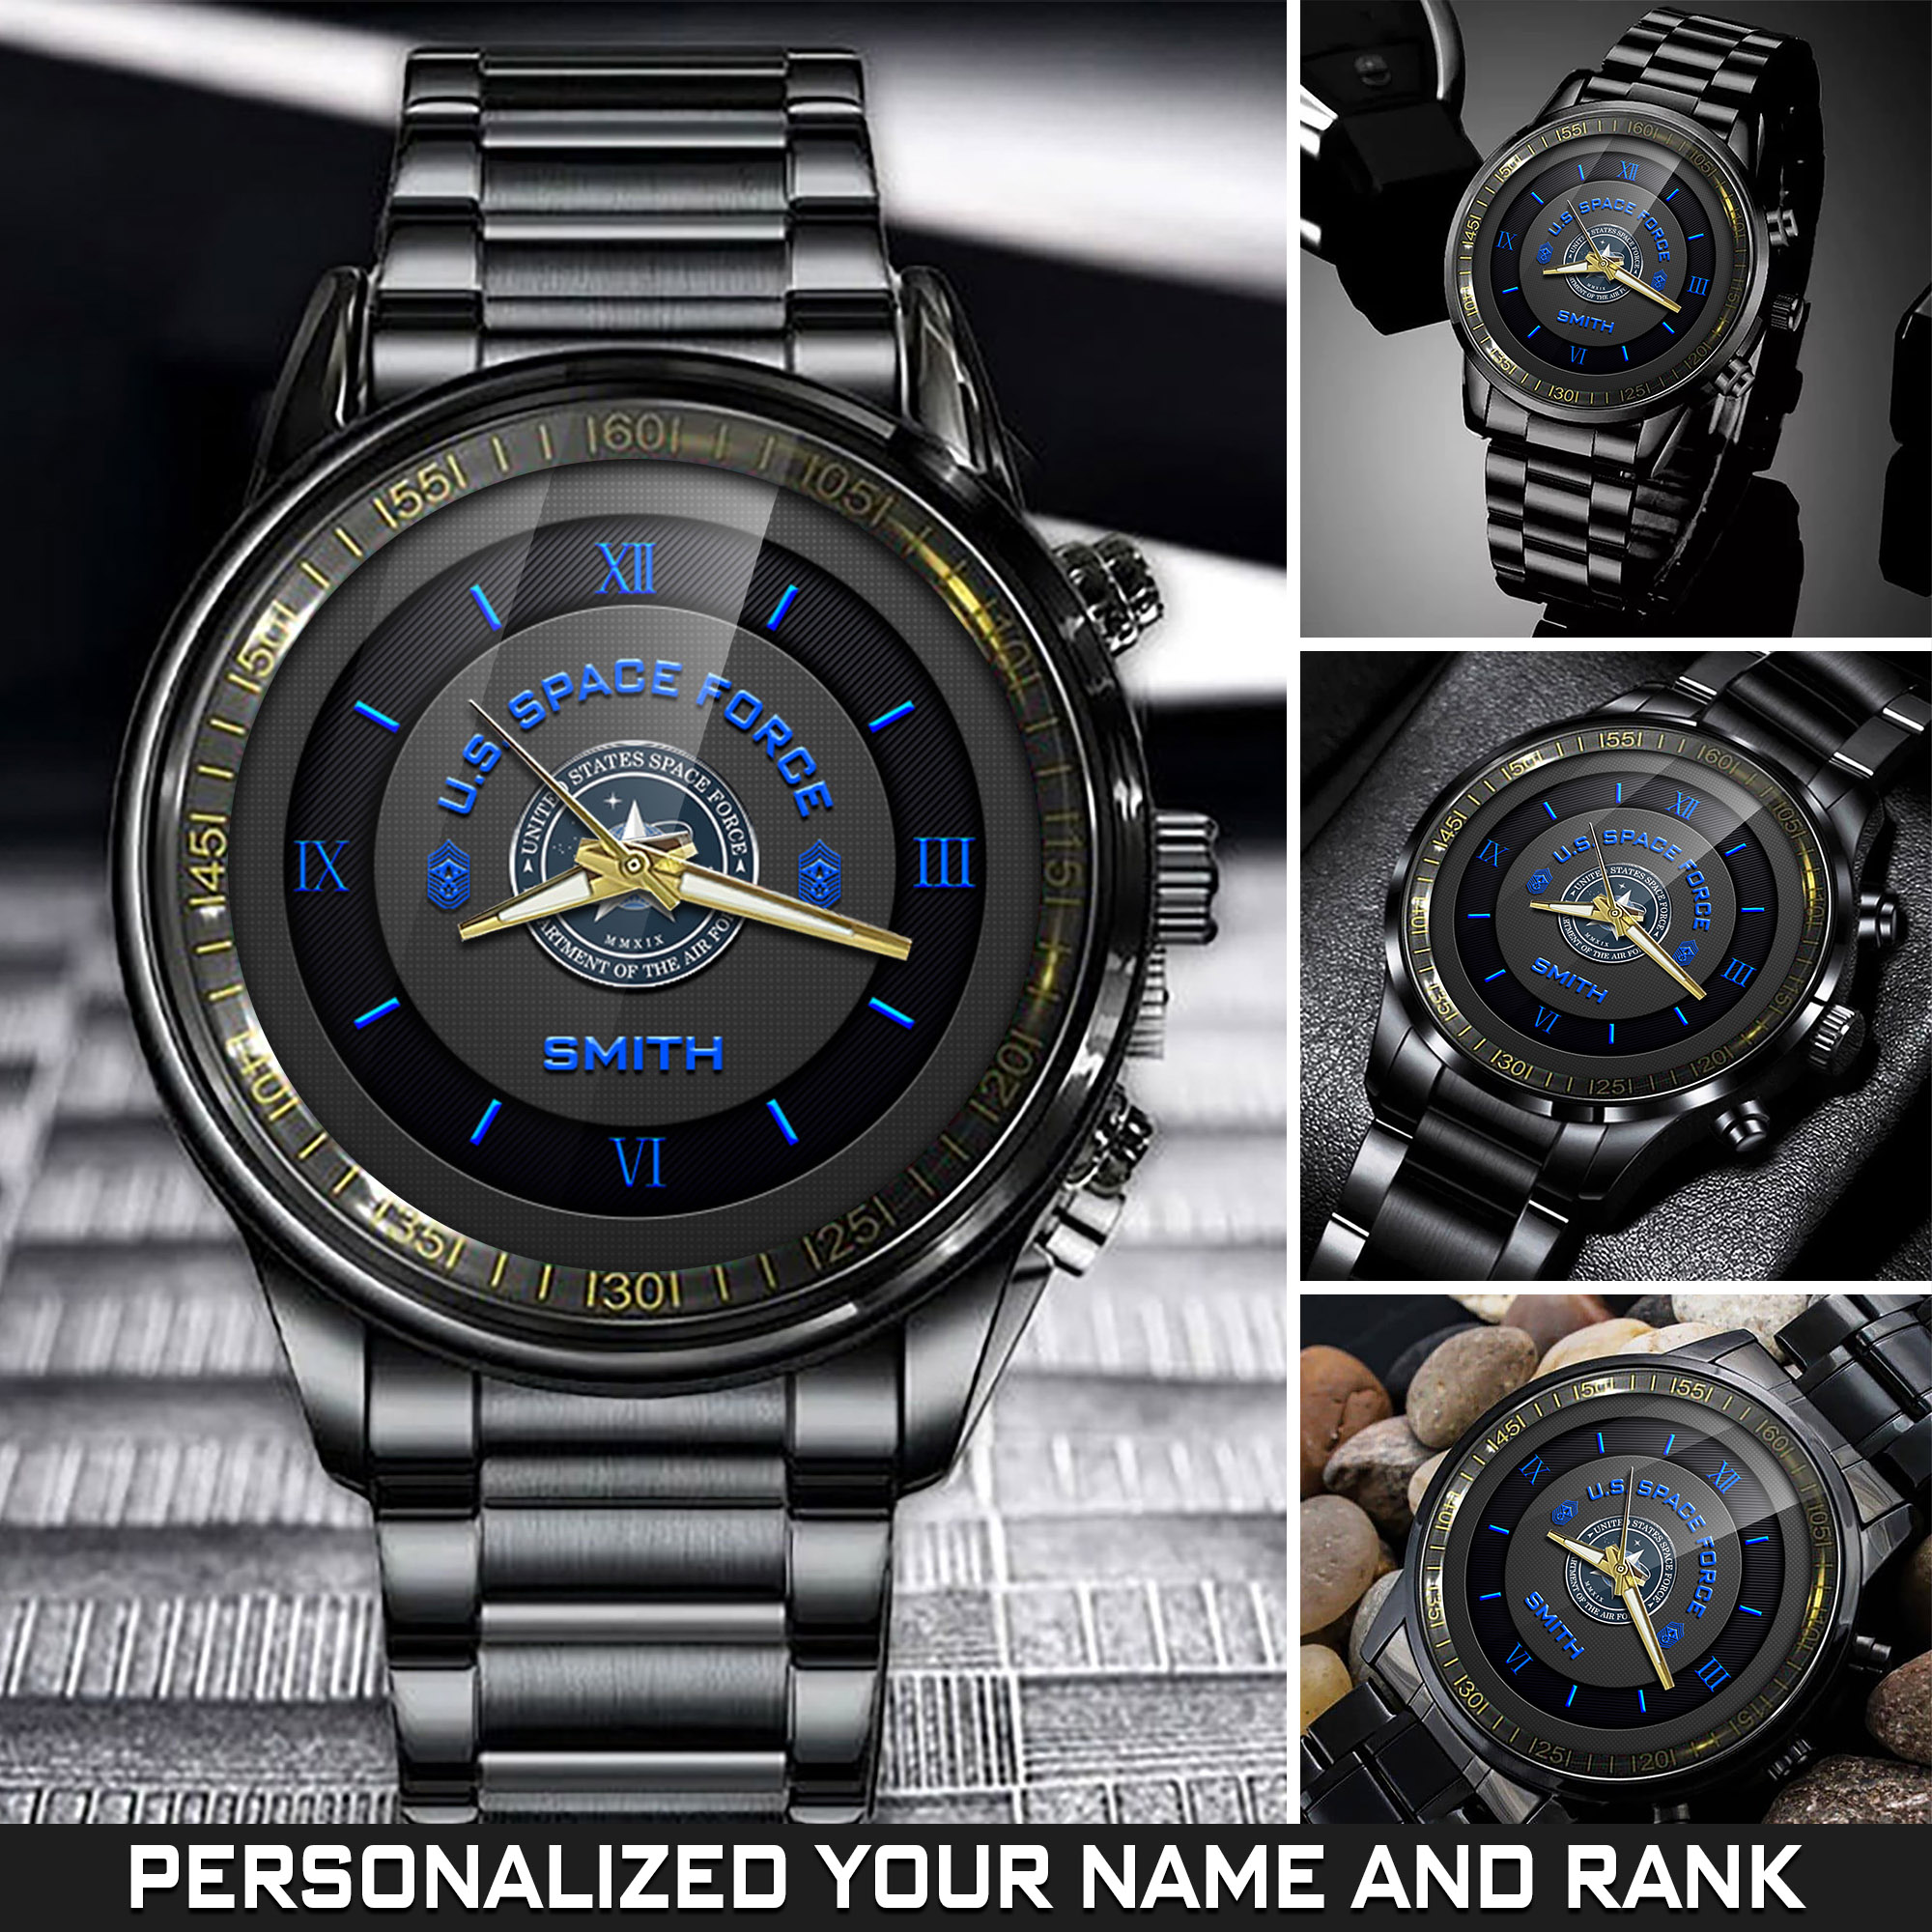 Personalized U.S. Space Force Black Fashion Watch With Your Name And Rank, Military Watches, Space Force Watches For Men, Veterans Gifts, Gift For Soldier